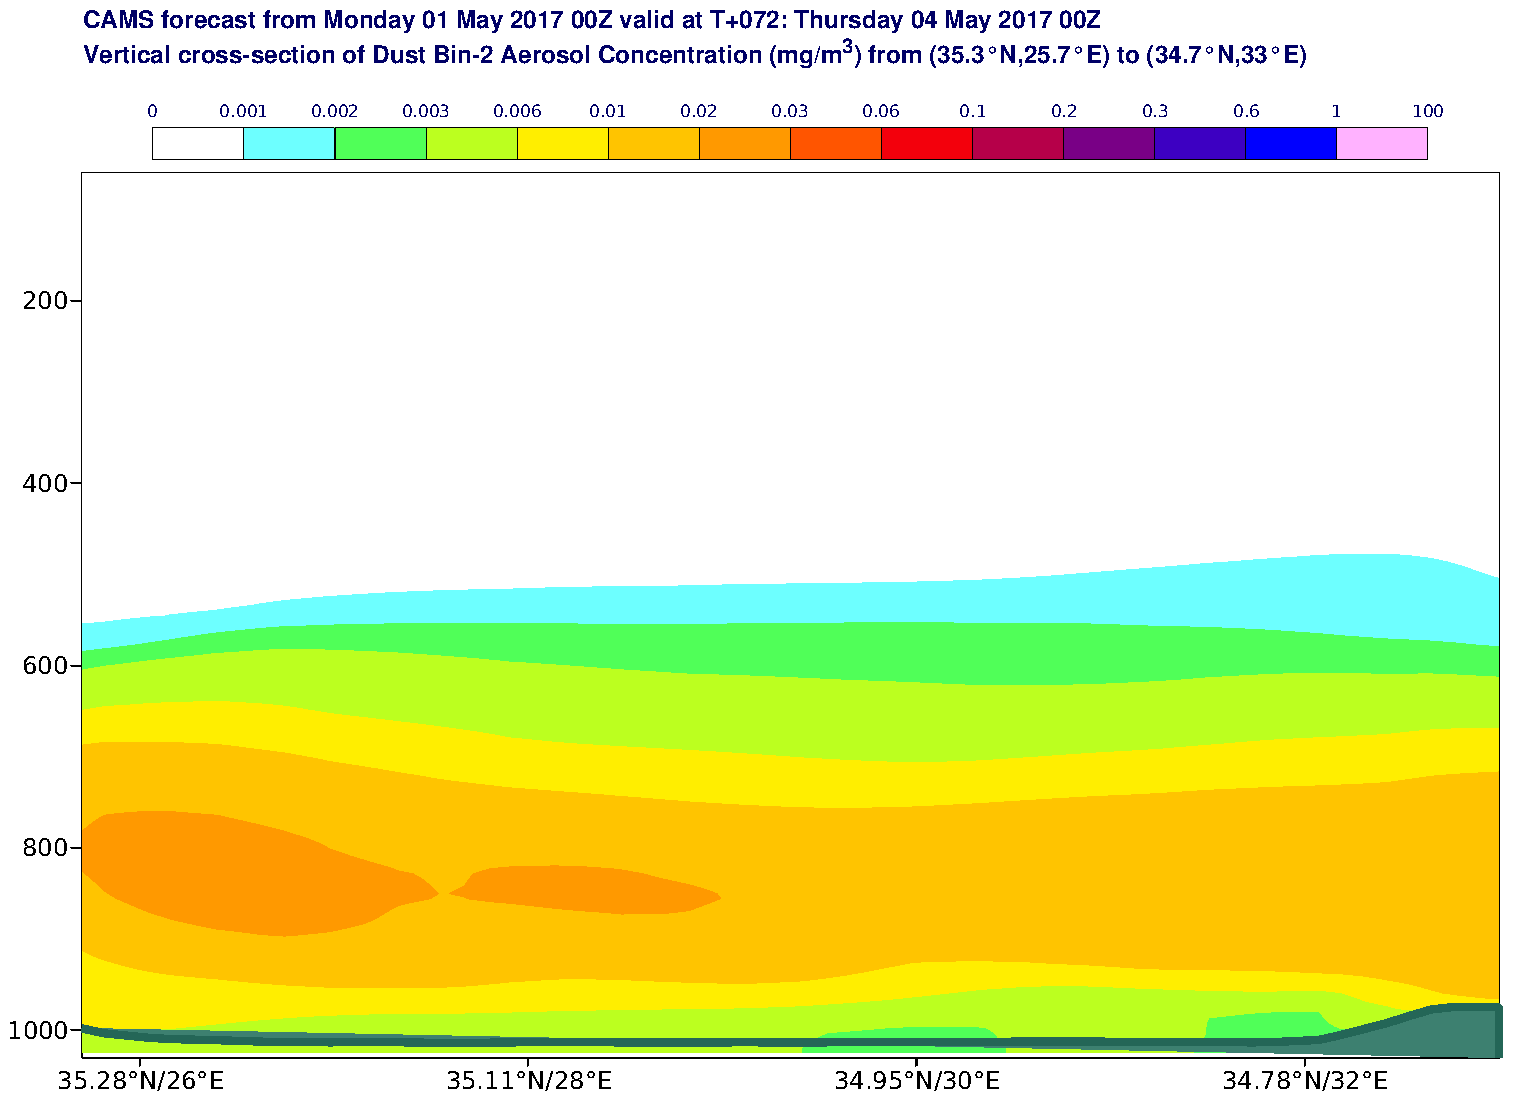 Vertical cross-section of Dust Bin-2 Aerosol Concentration (mg/m3) valid at T72 - 2017-05-04 00:00